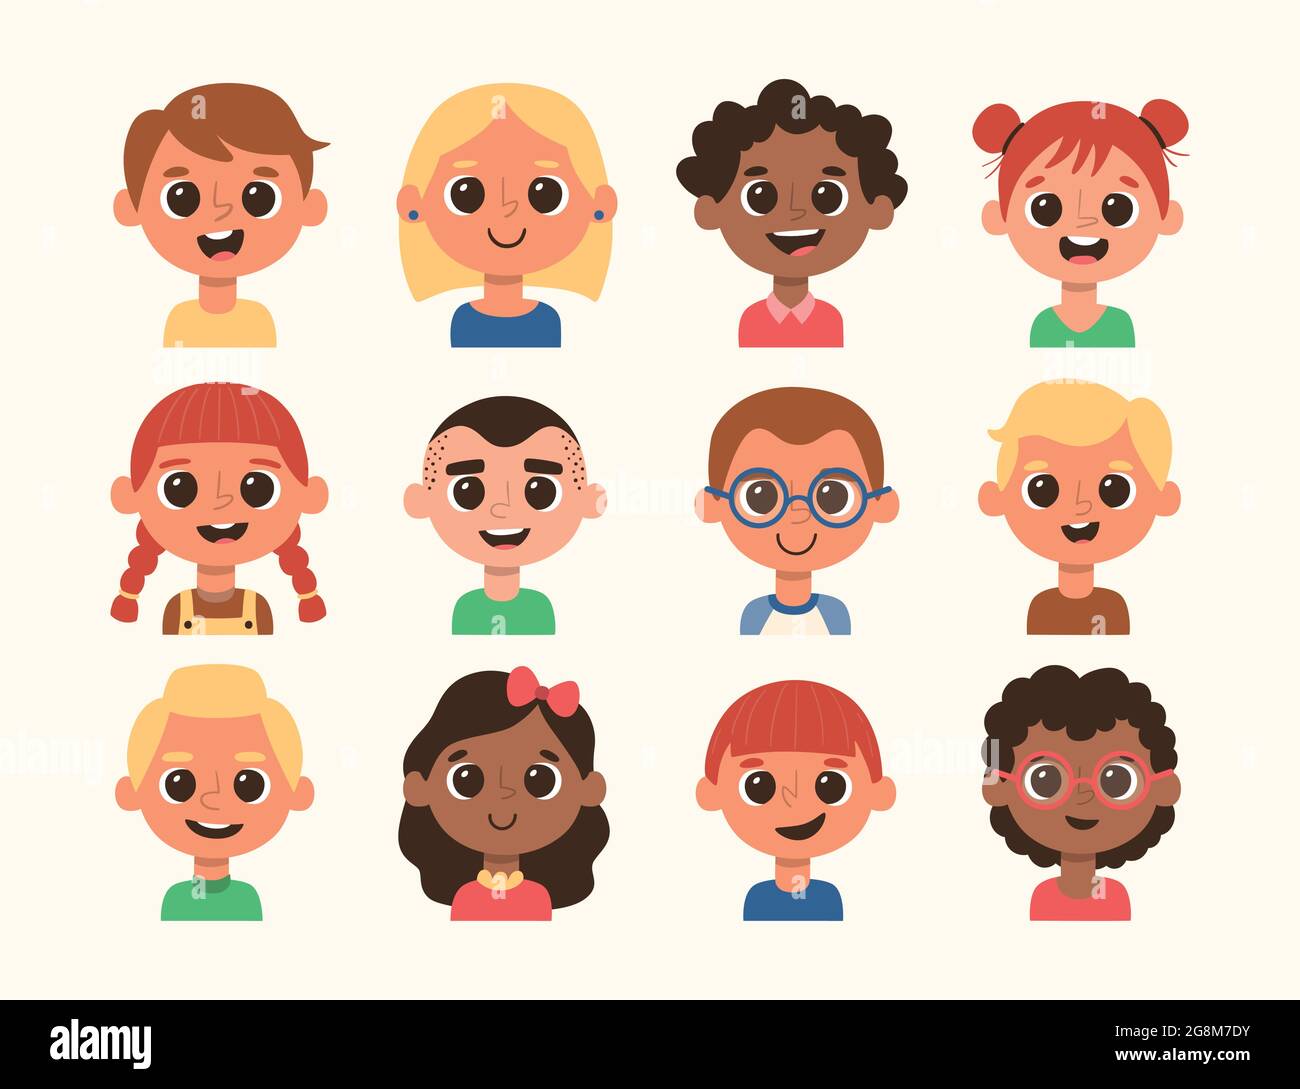 Cute children avatar set. Different hair style and skin color. Cartoon illustration. Set 1 of 4. Stock Vector